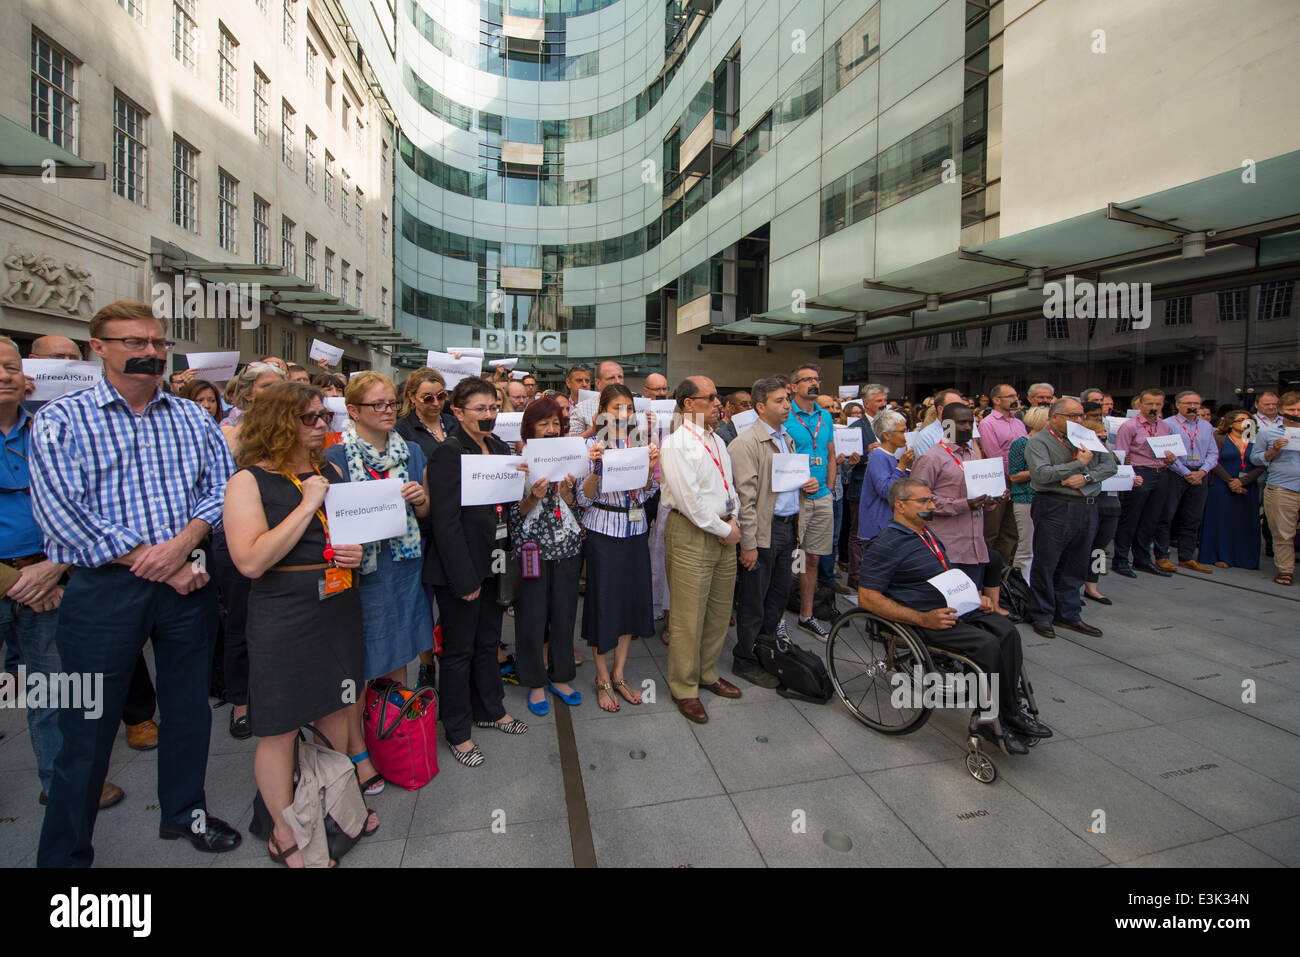 Portland Place, BBC Broadcasting House, London UK. 24th June 2014. Journalists and staff, many with mouths taped, meet outside BBC headquarters building to protest and hold a one minute silence in support of Al Jazeera journalists imprisoned in Egypt. #FreeAJStaff Credit:  Malcolm Park editorial/Alamy Live News. Stock Photo